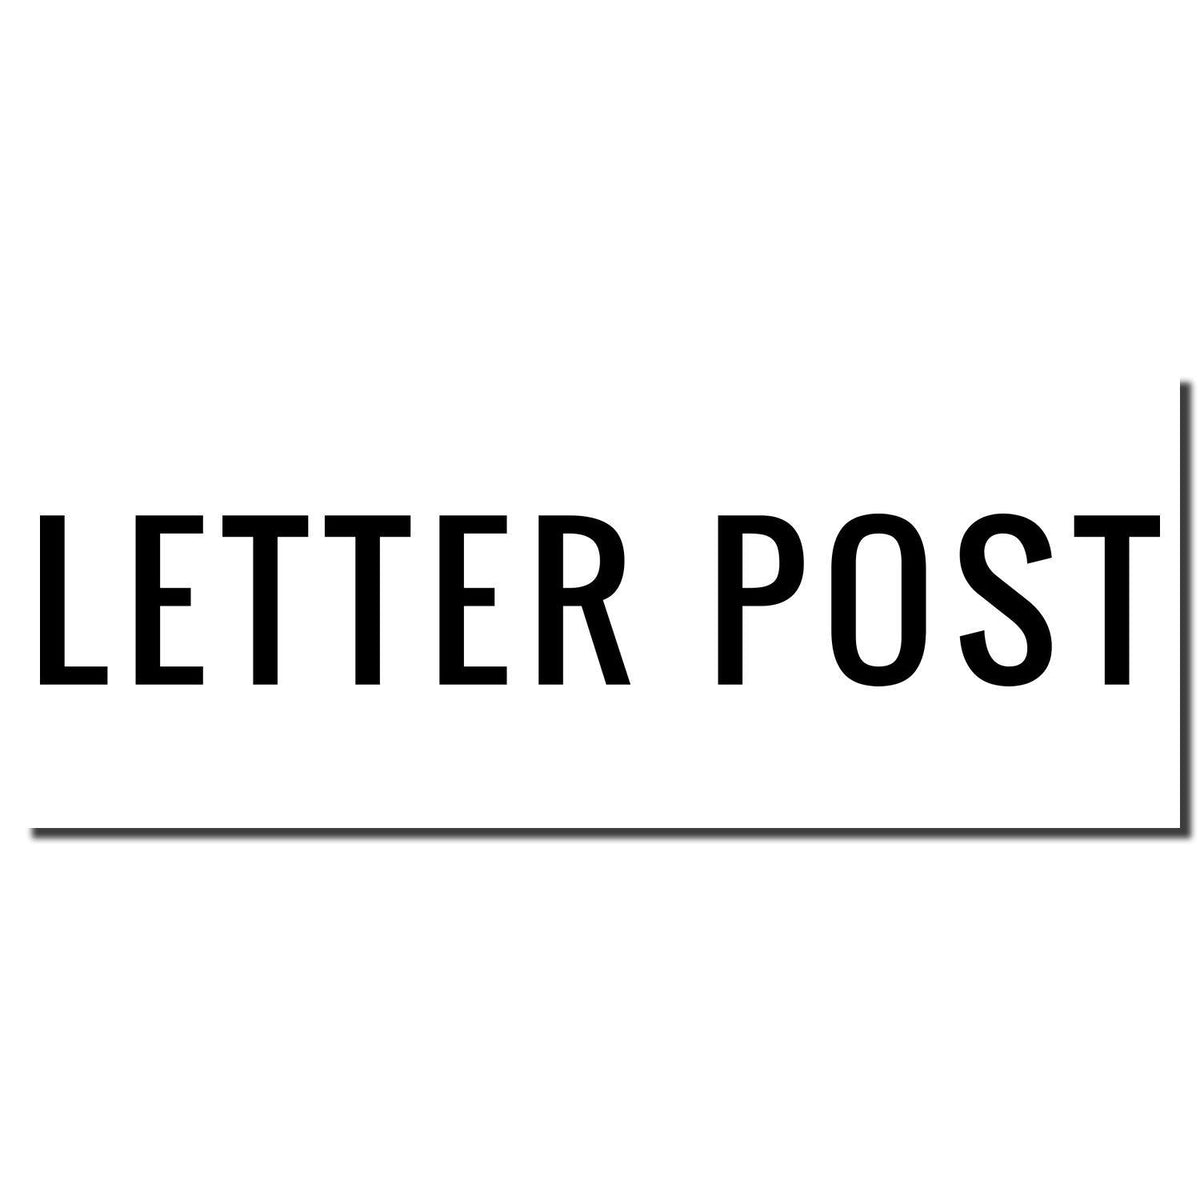 Letter Post Rubber Stamp - Engineer Seal Stamps - Brand_Acorn, Impression Size_Small, Stamp Type_Regular Stamp, Type of Use_General, Type of Use_Postal &amp; Mailing